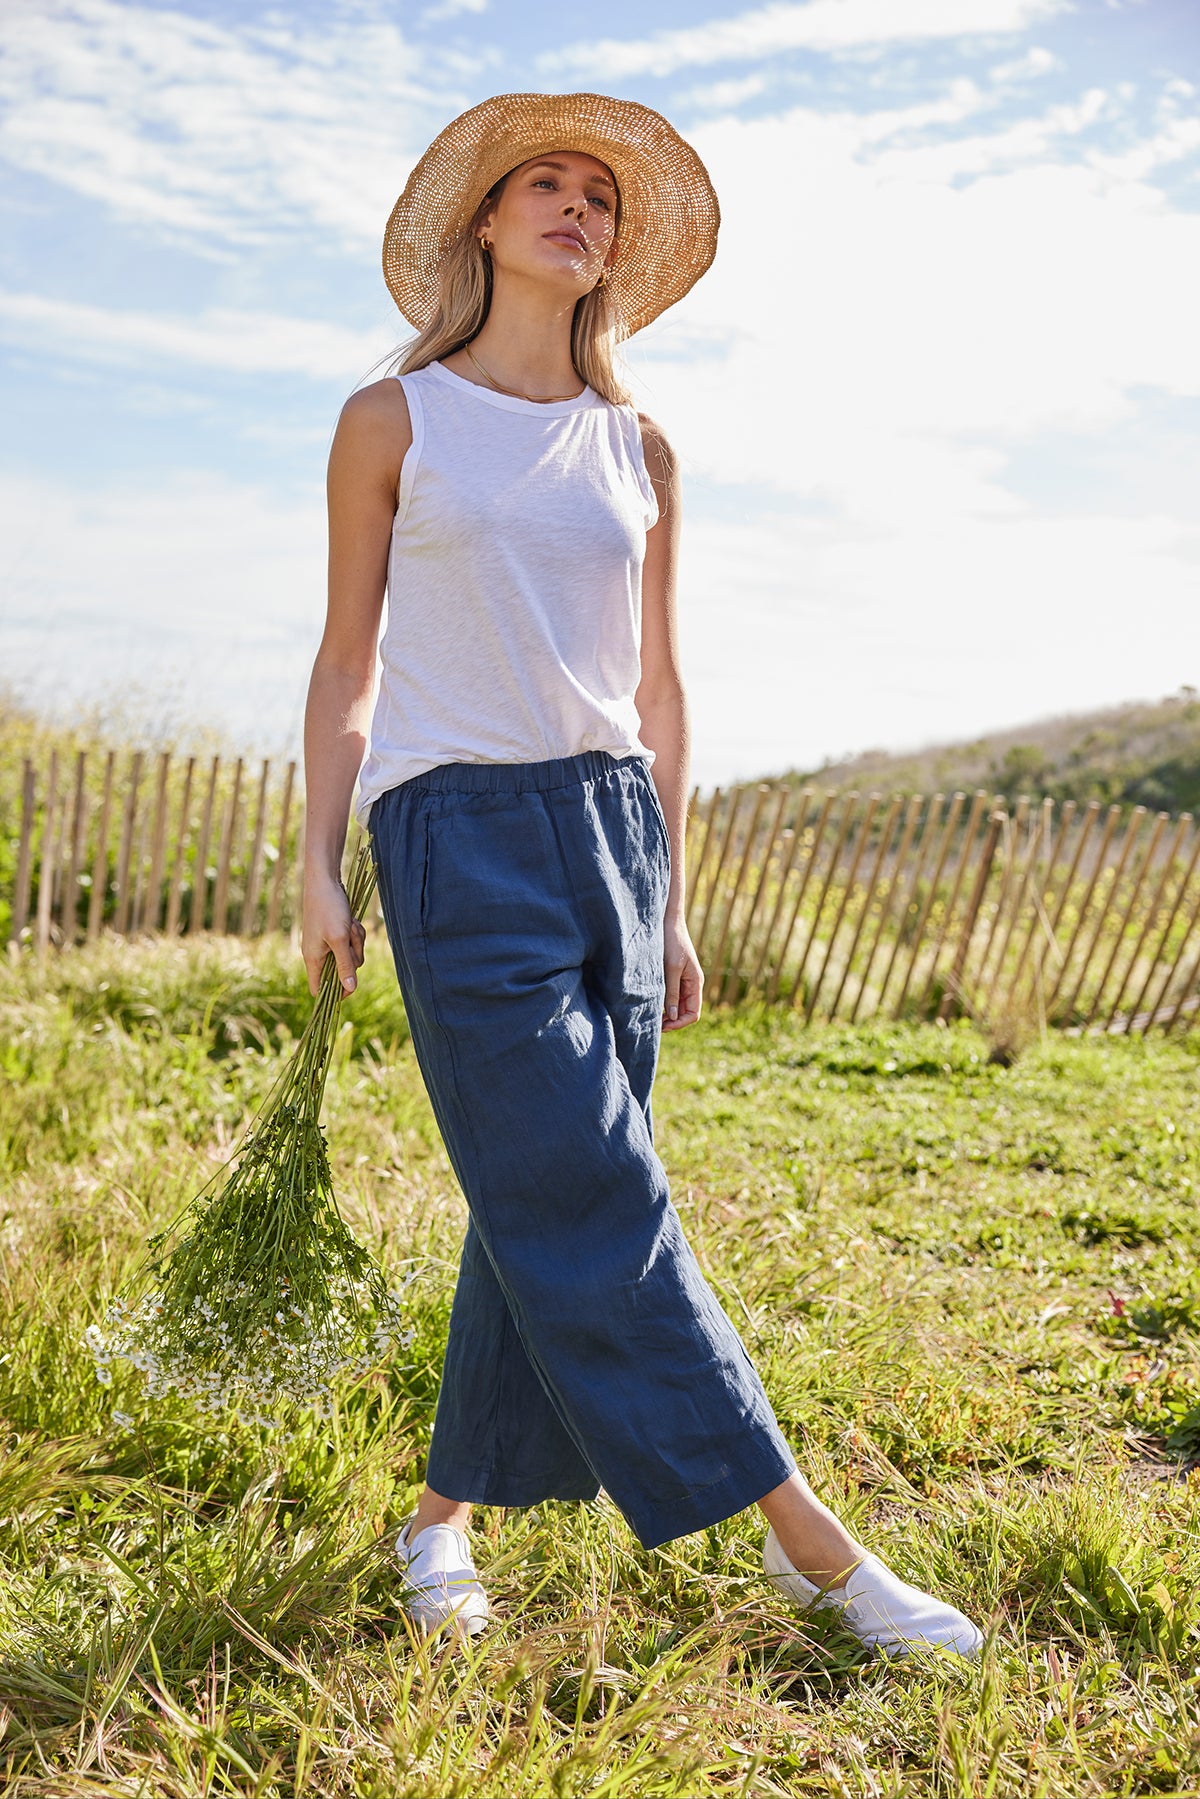 A woman wearing a Velvet by Graham & Spencer straw hat and blue linen pants in a field, showcasing her spring/summer style and western charm.-26184707571905